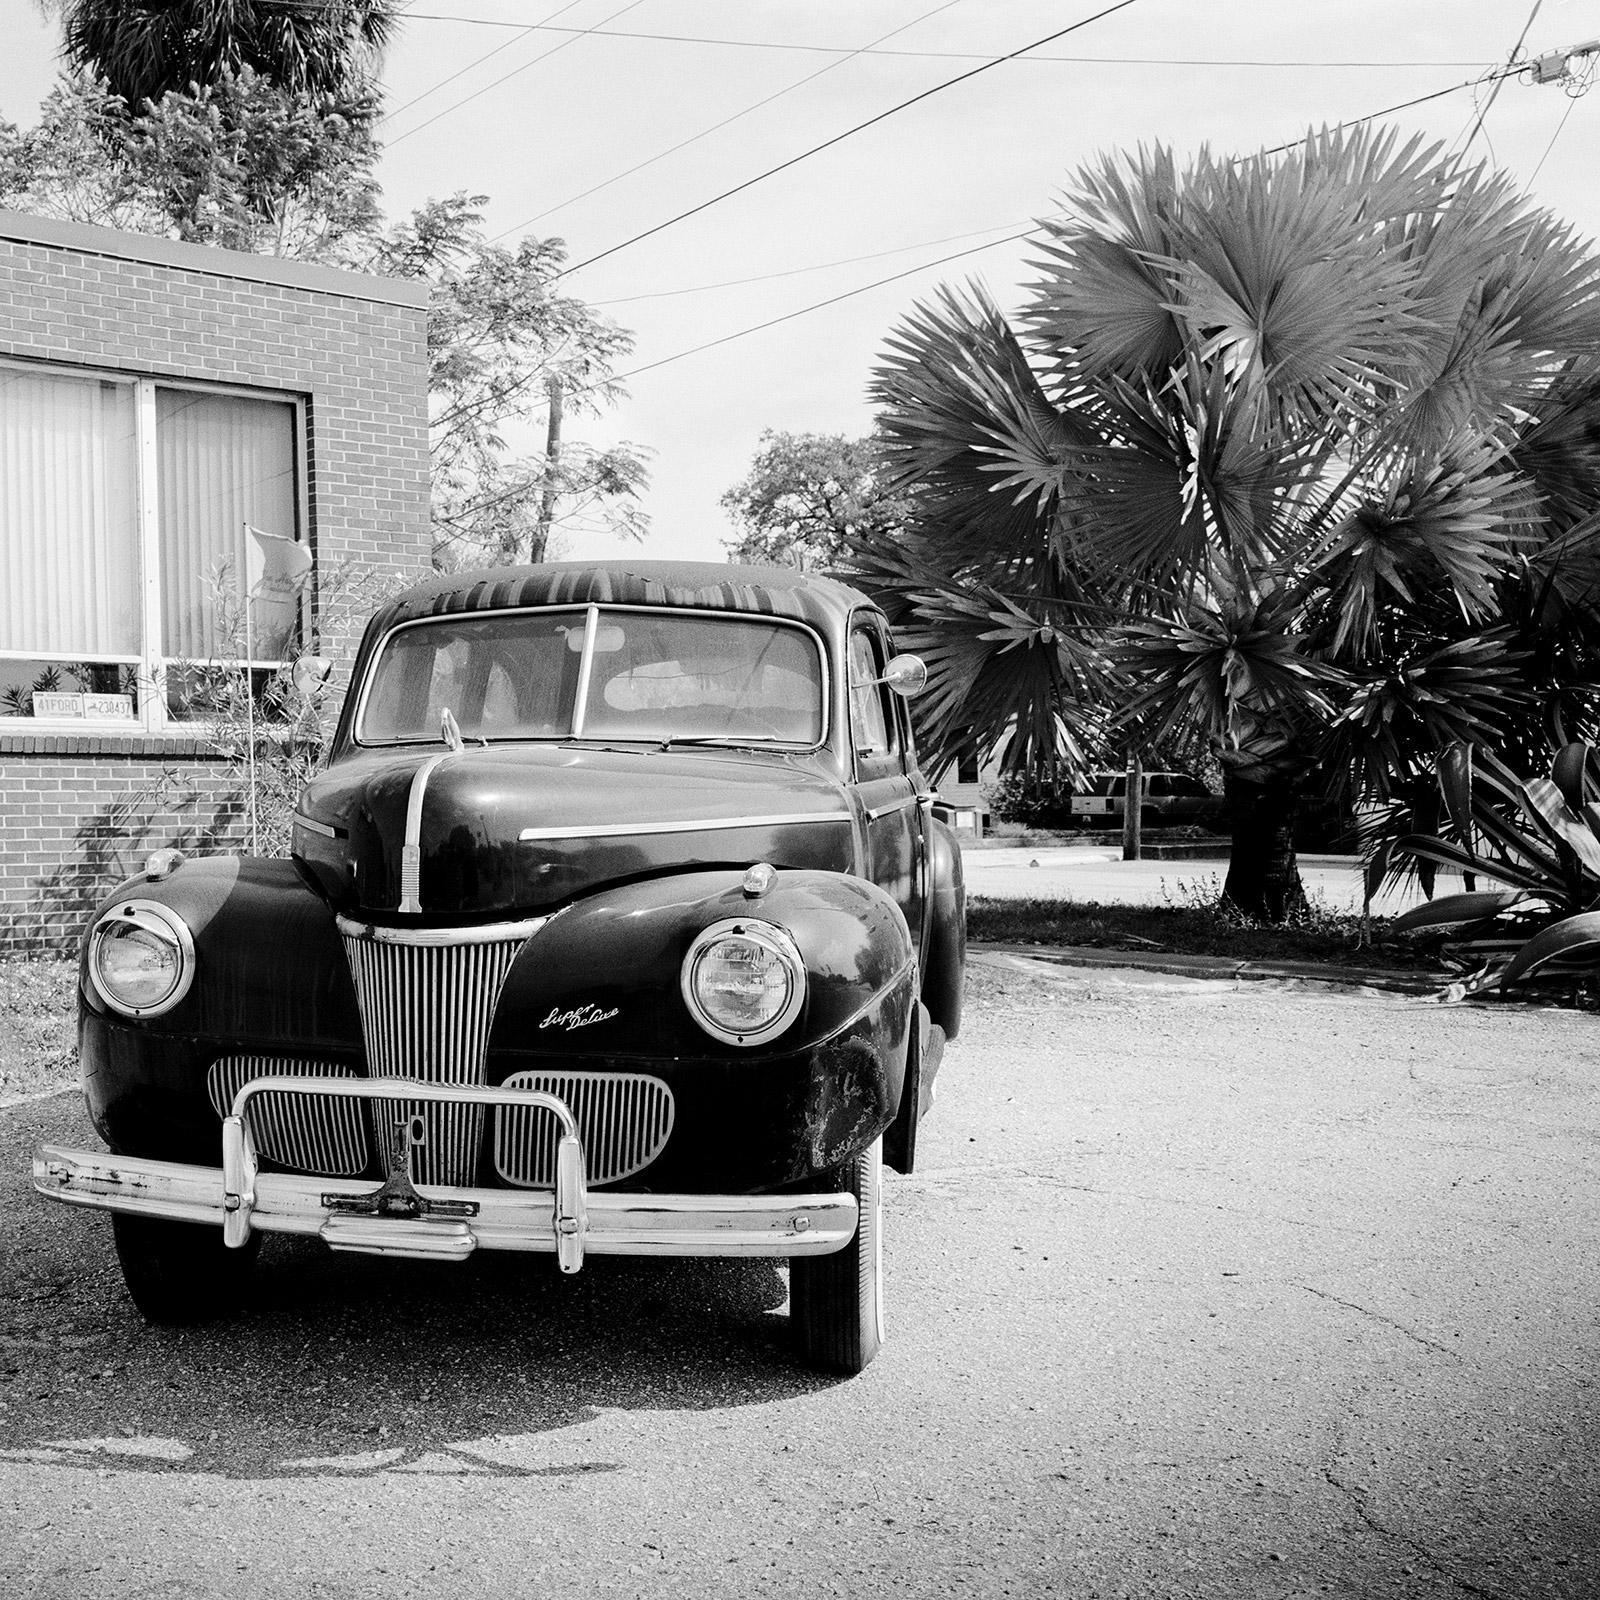 Gerald Berghammer Black and White Photograph – 1941 Ford Super Deluxe Business Coupe, USA, schwarz-weiße Fotografie, Landschaft